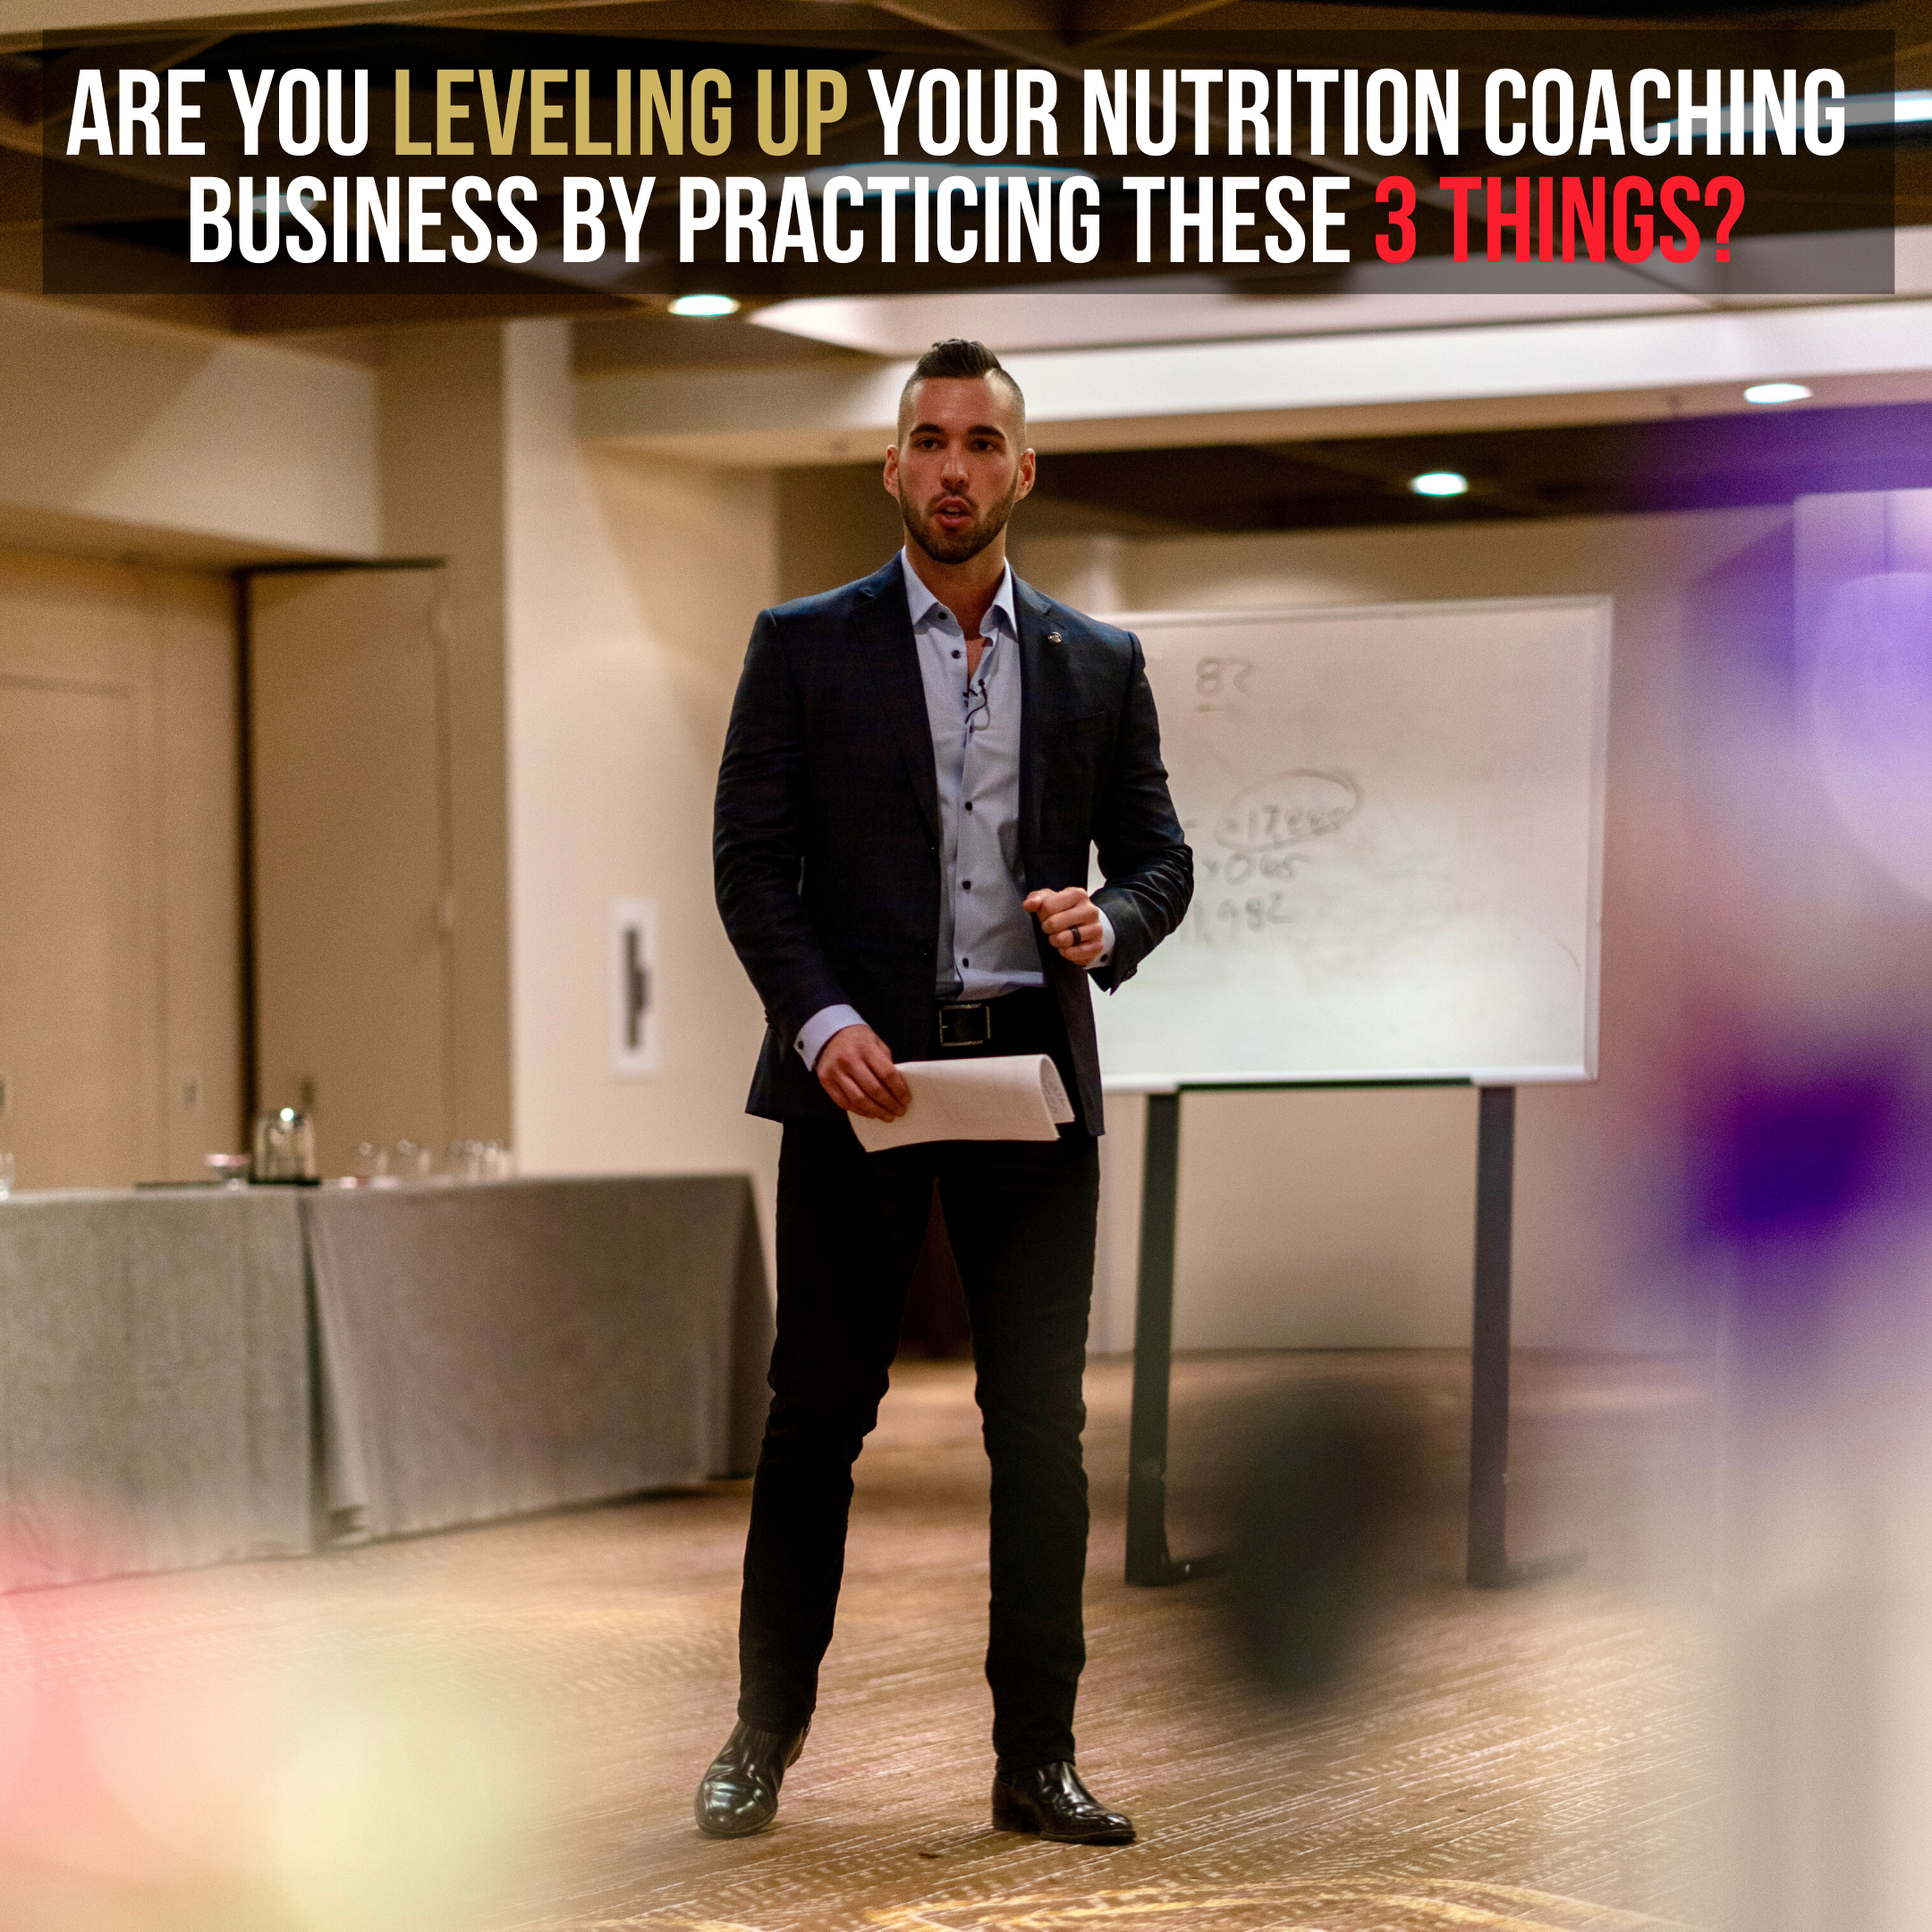 How to Grow Your Nutrition Coaching Business